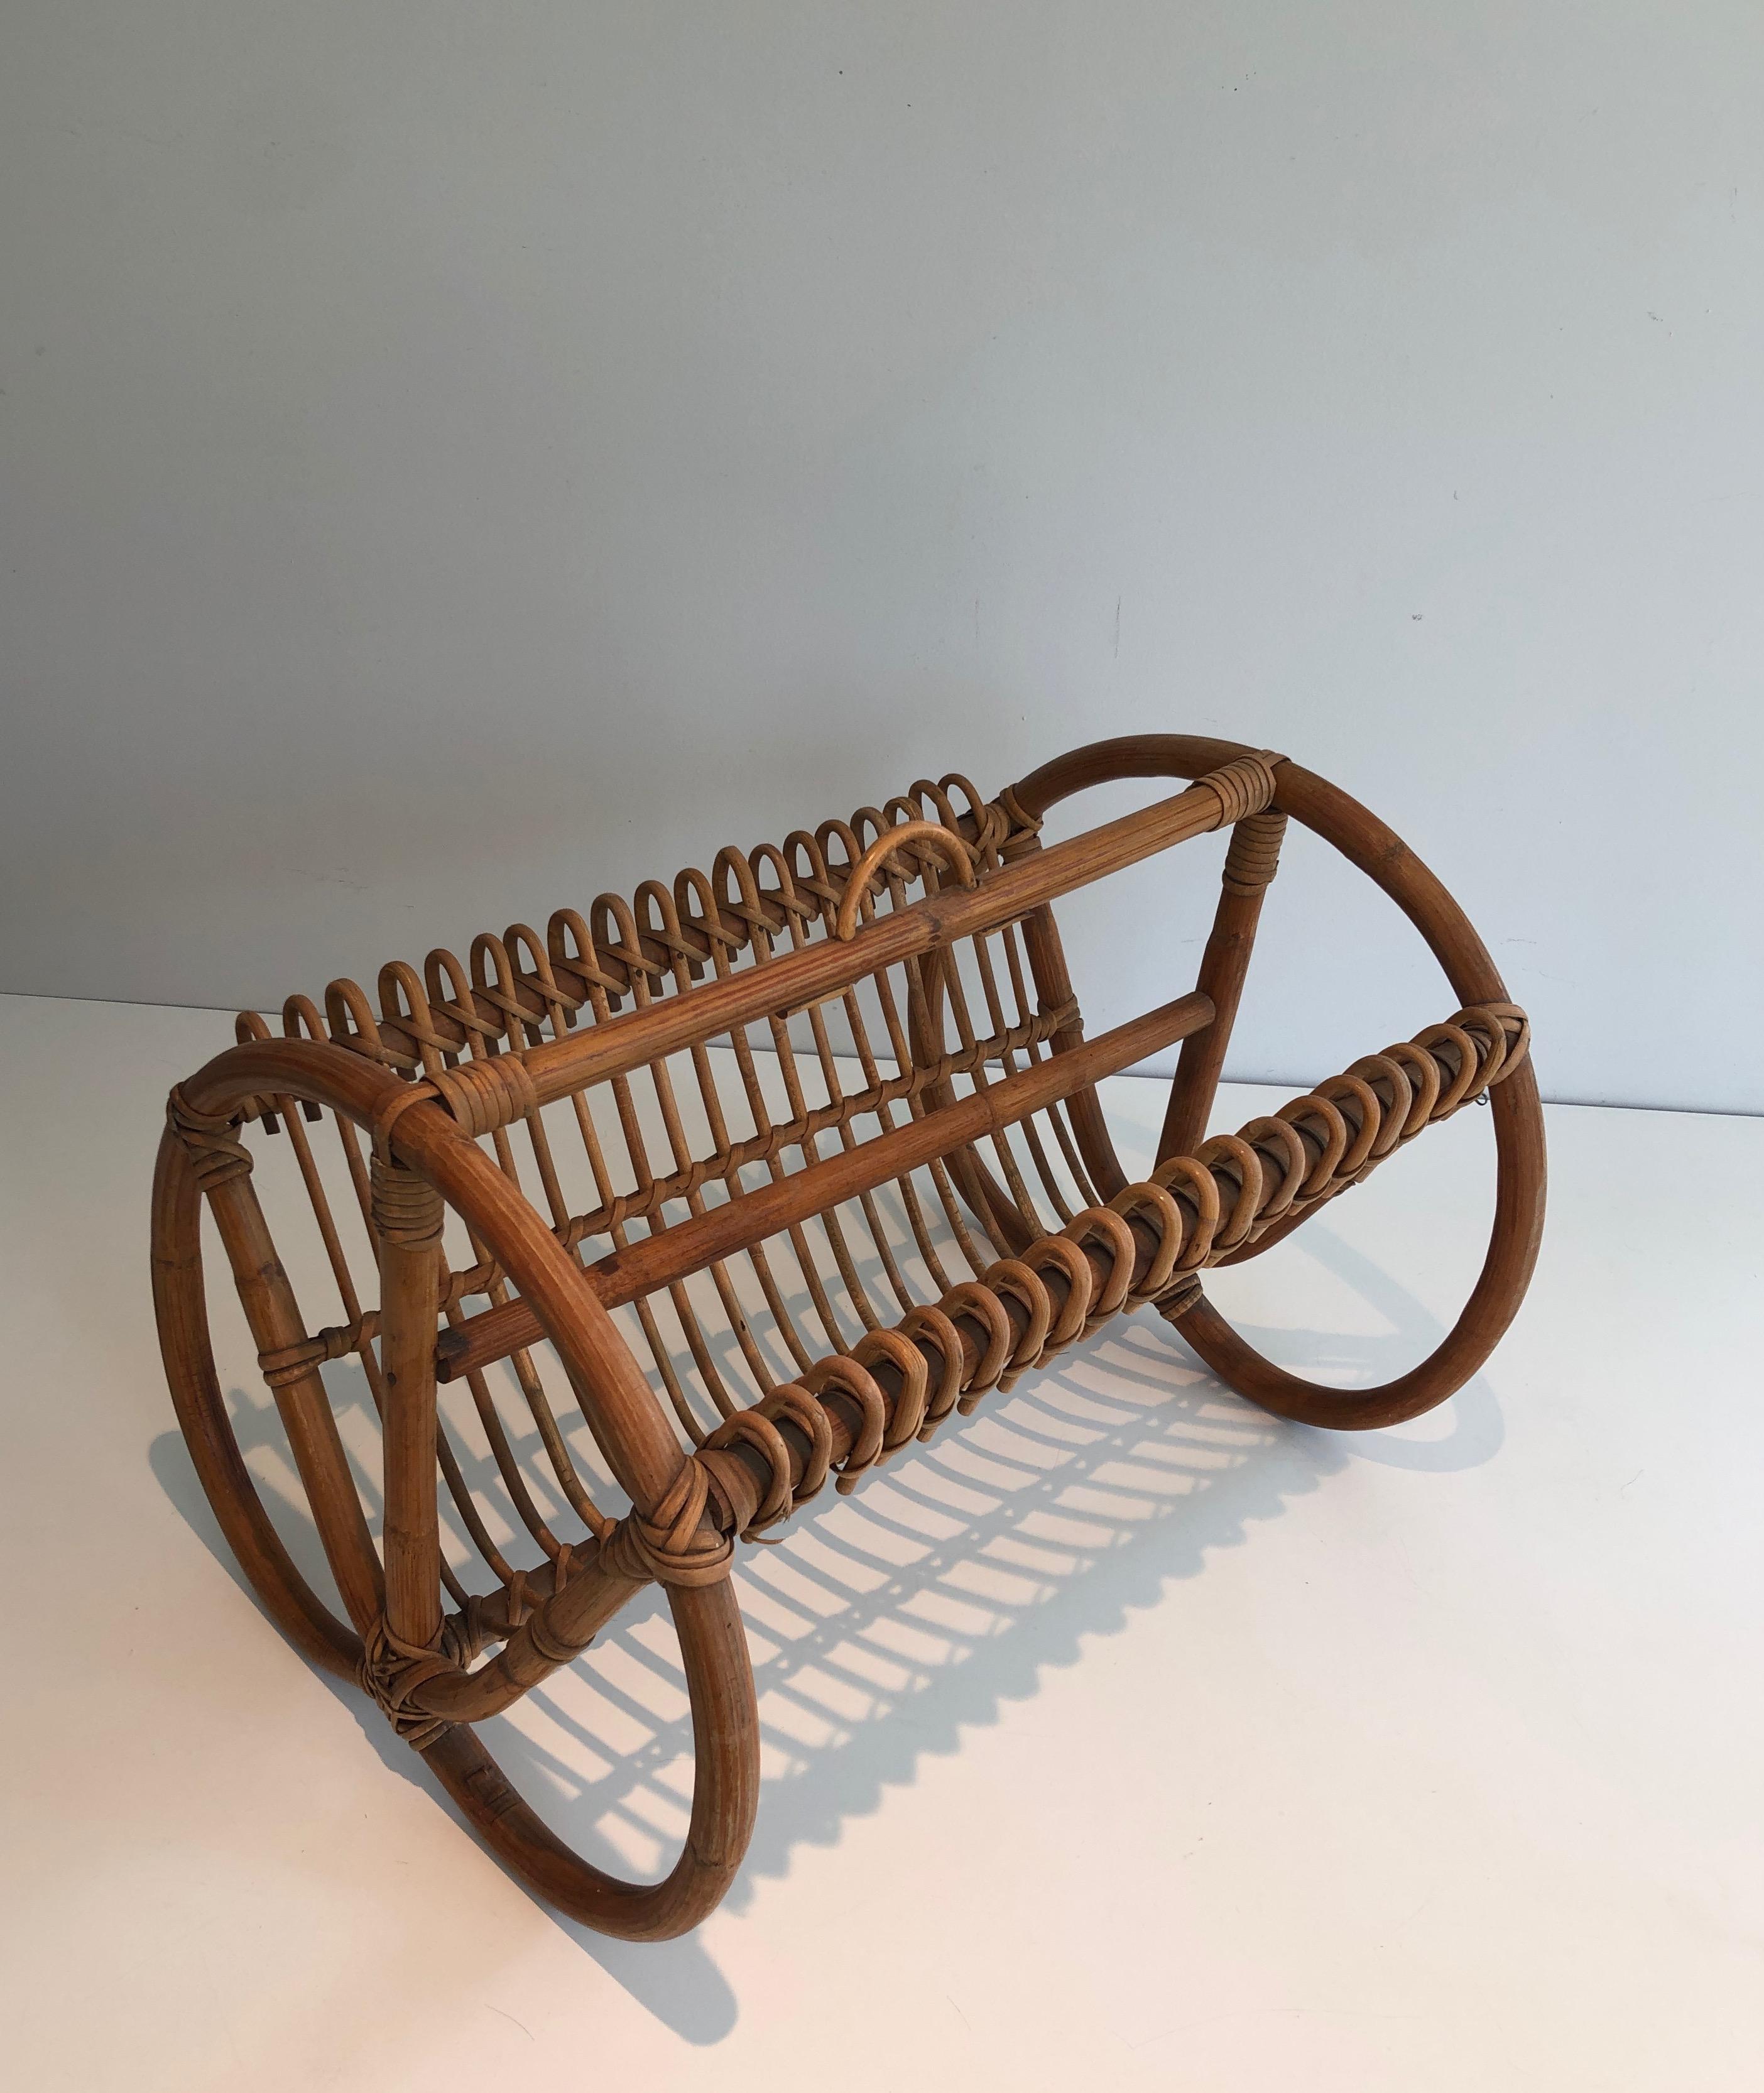 This very nice and unusual magazine rack is made of rattan. This is a French work, circa 1950.